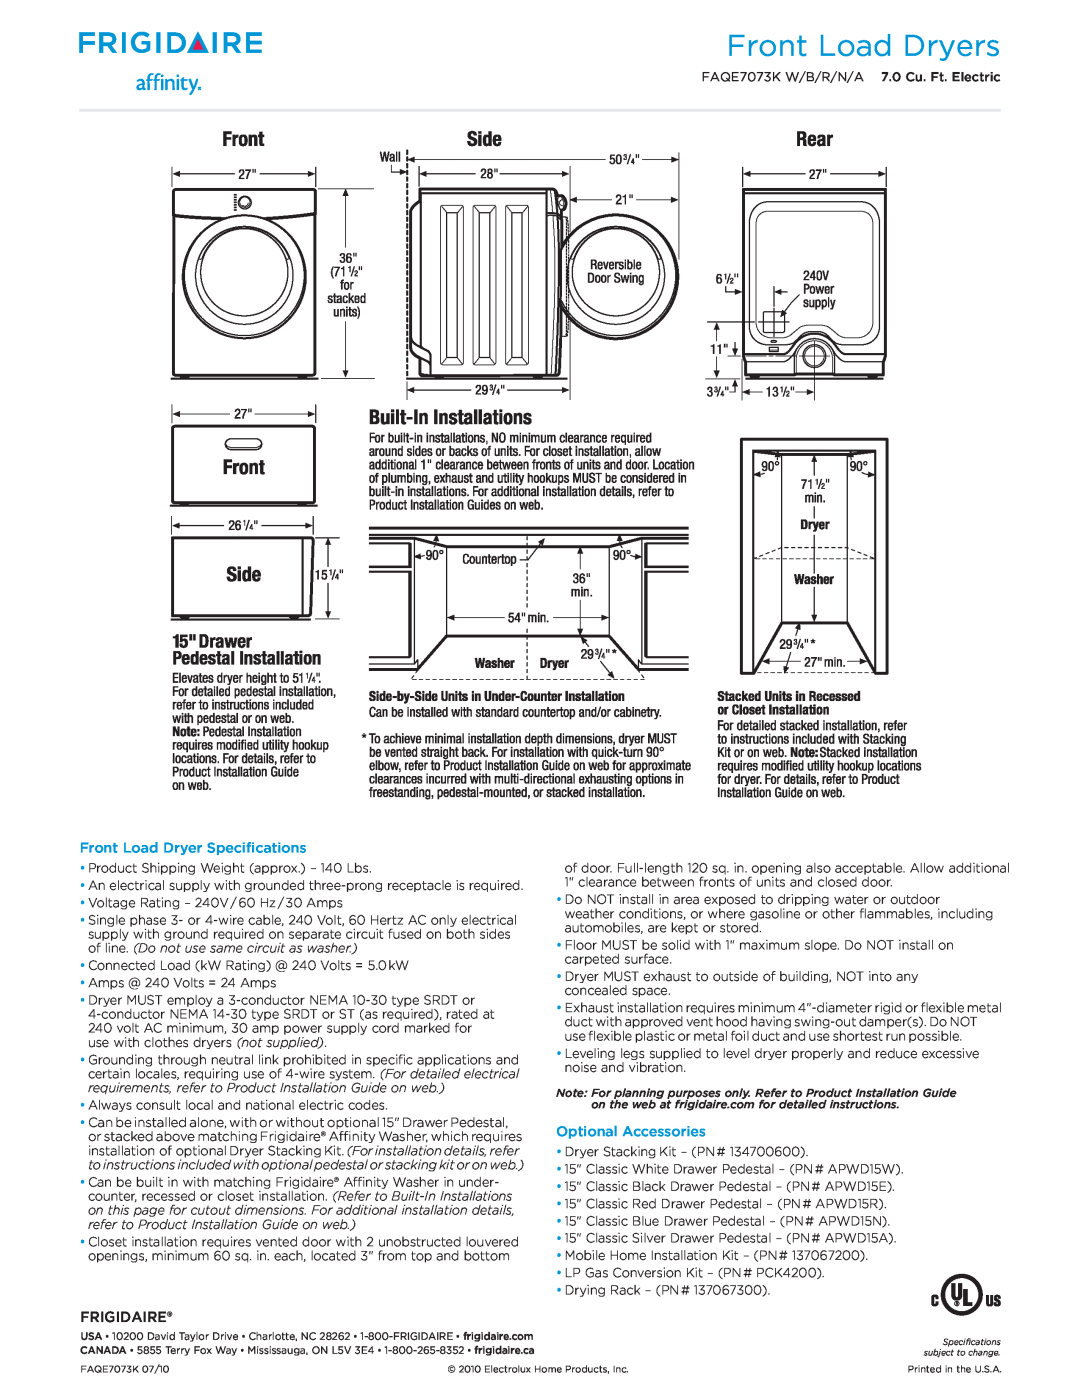 Frigidaire FAQE7073K W/B/R/N/A Front Load Dryer Specifications, Frigidaire, Optional Accessories, Front Load Dryers 